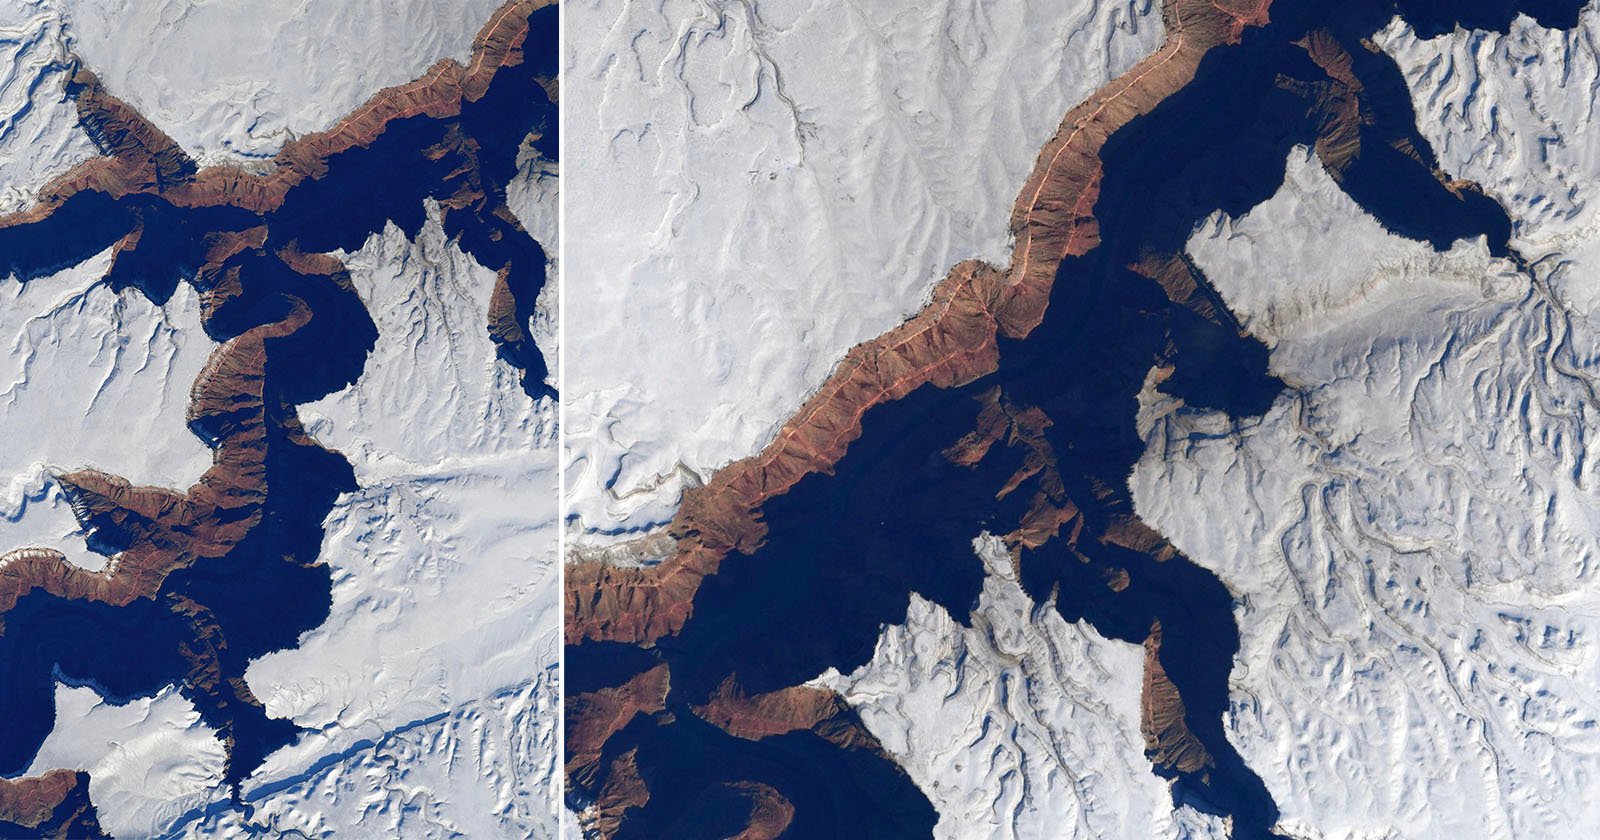  astronaut captures unusual photos snow-covered grand canyon 